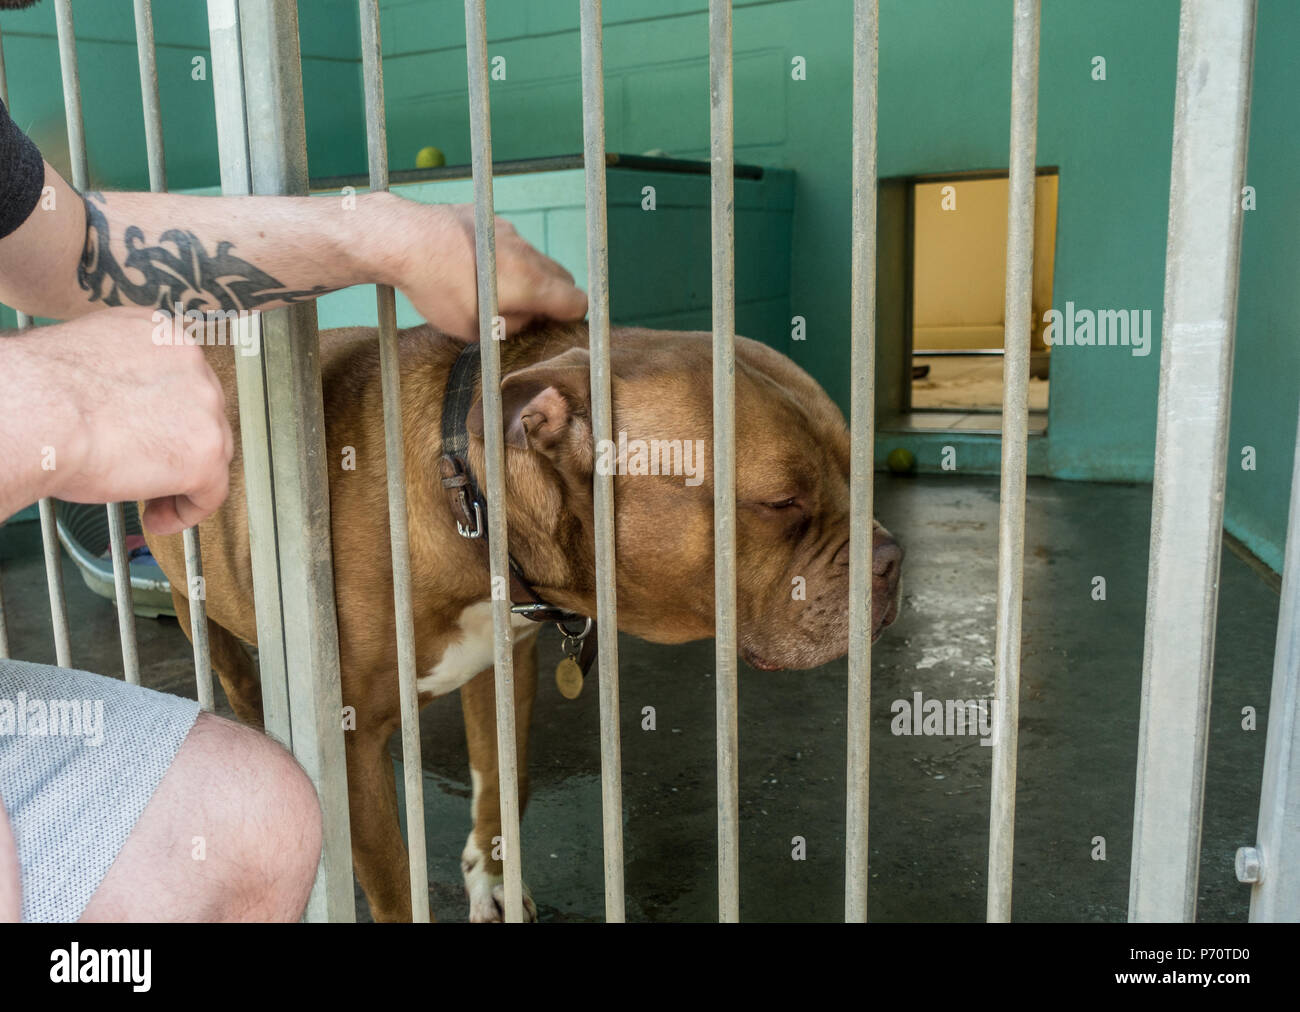 Many Dogs Home High Resolution Stock Photography and Images - Alamy